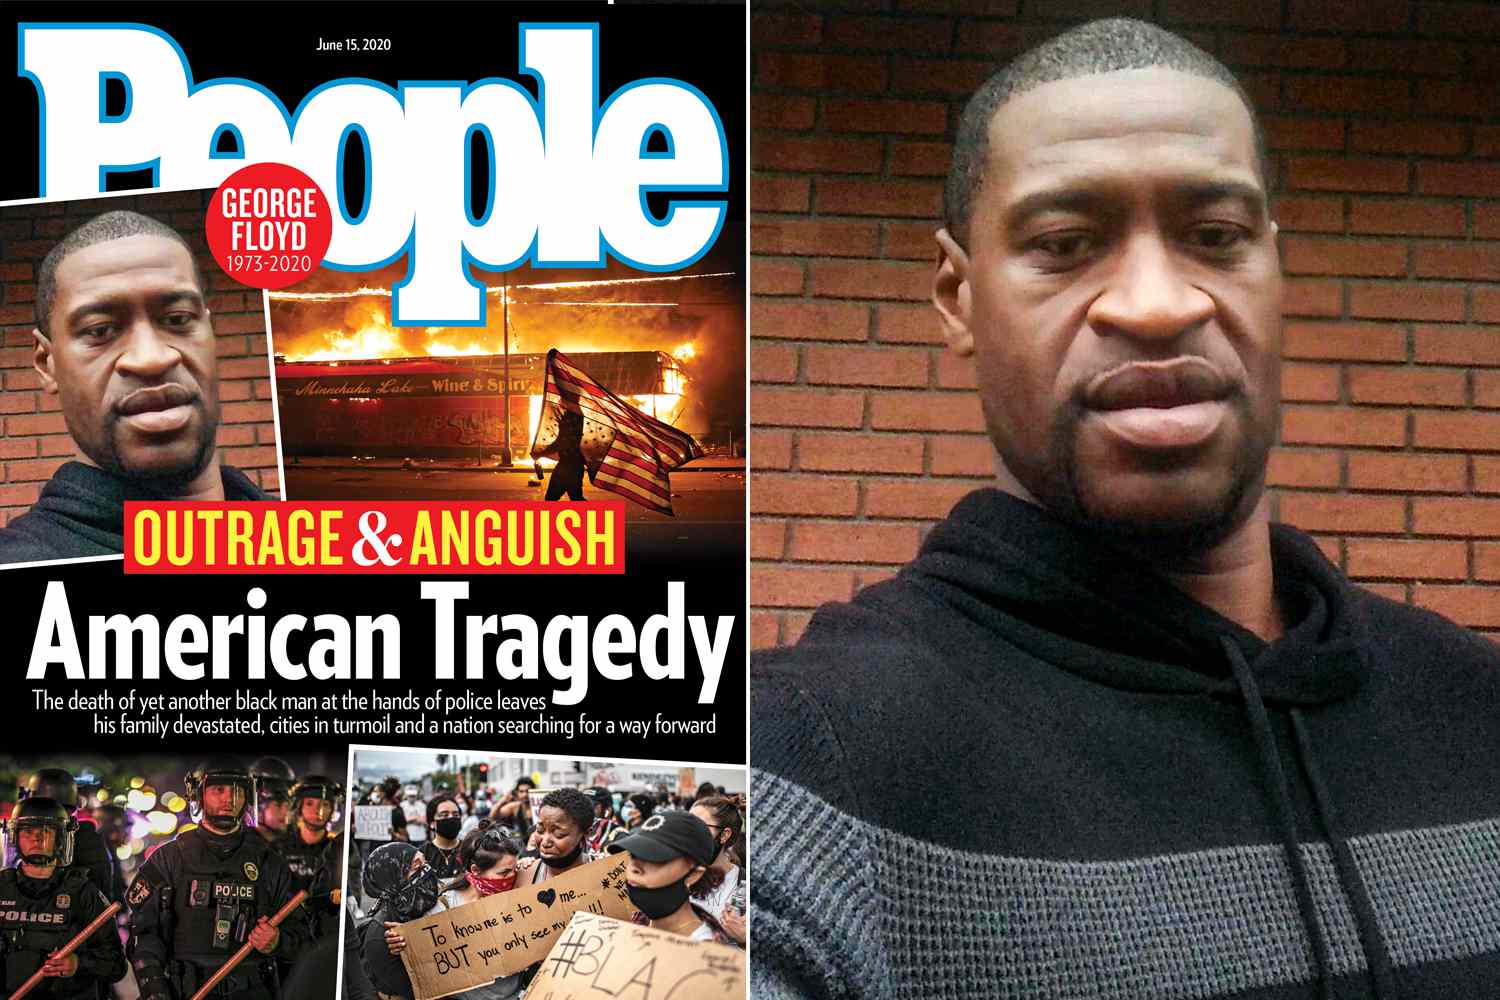 Anguish in America: A Nation Torn Apart — Read PEOPLE's 2020 Cover Story 4 Years After George Floyd's Murder